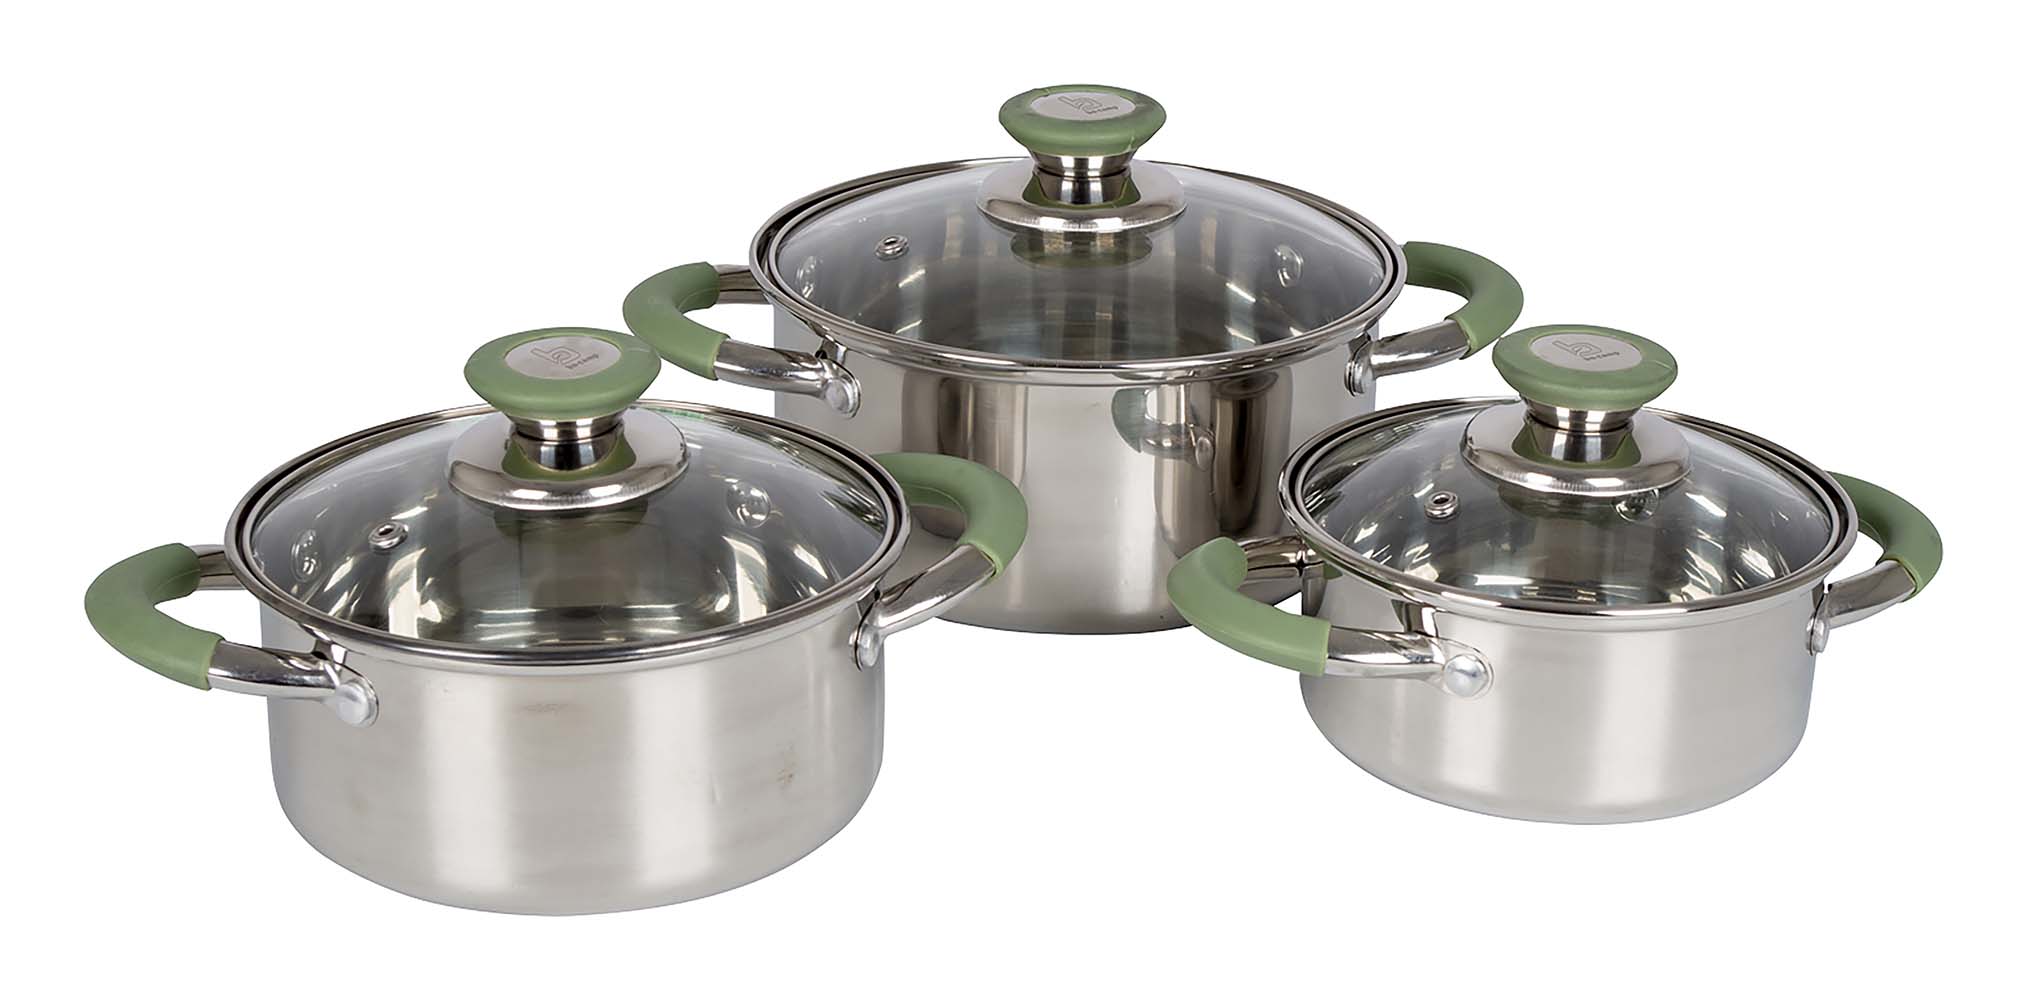 2100920 A 3-part low cookware set. These cooking pans are equipped with sturdy and heat-resistant hand grips and a heat-resistant knob on the lid. Can be used on gas, ceramic and electrical heat sources. Dimensions (Øxh): 14x7, 16x8 and 18x9 cm. Contents: 1,1, 1,6 and 2.3 litres.